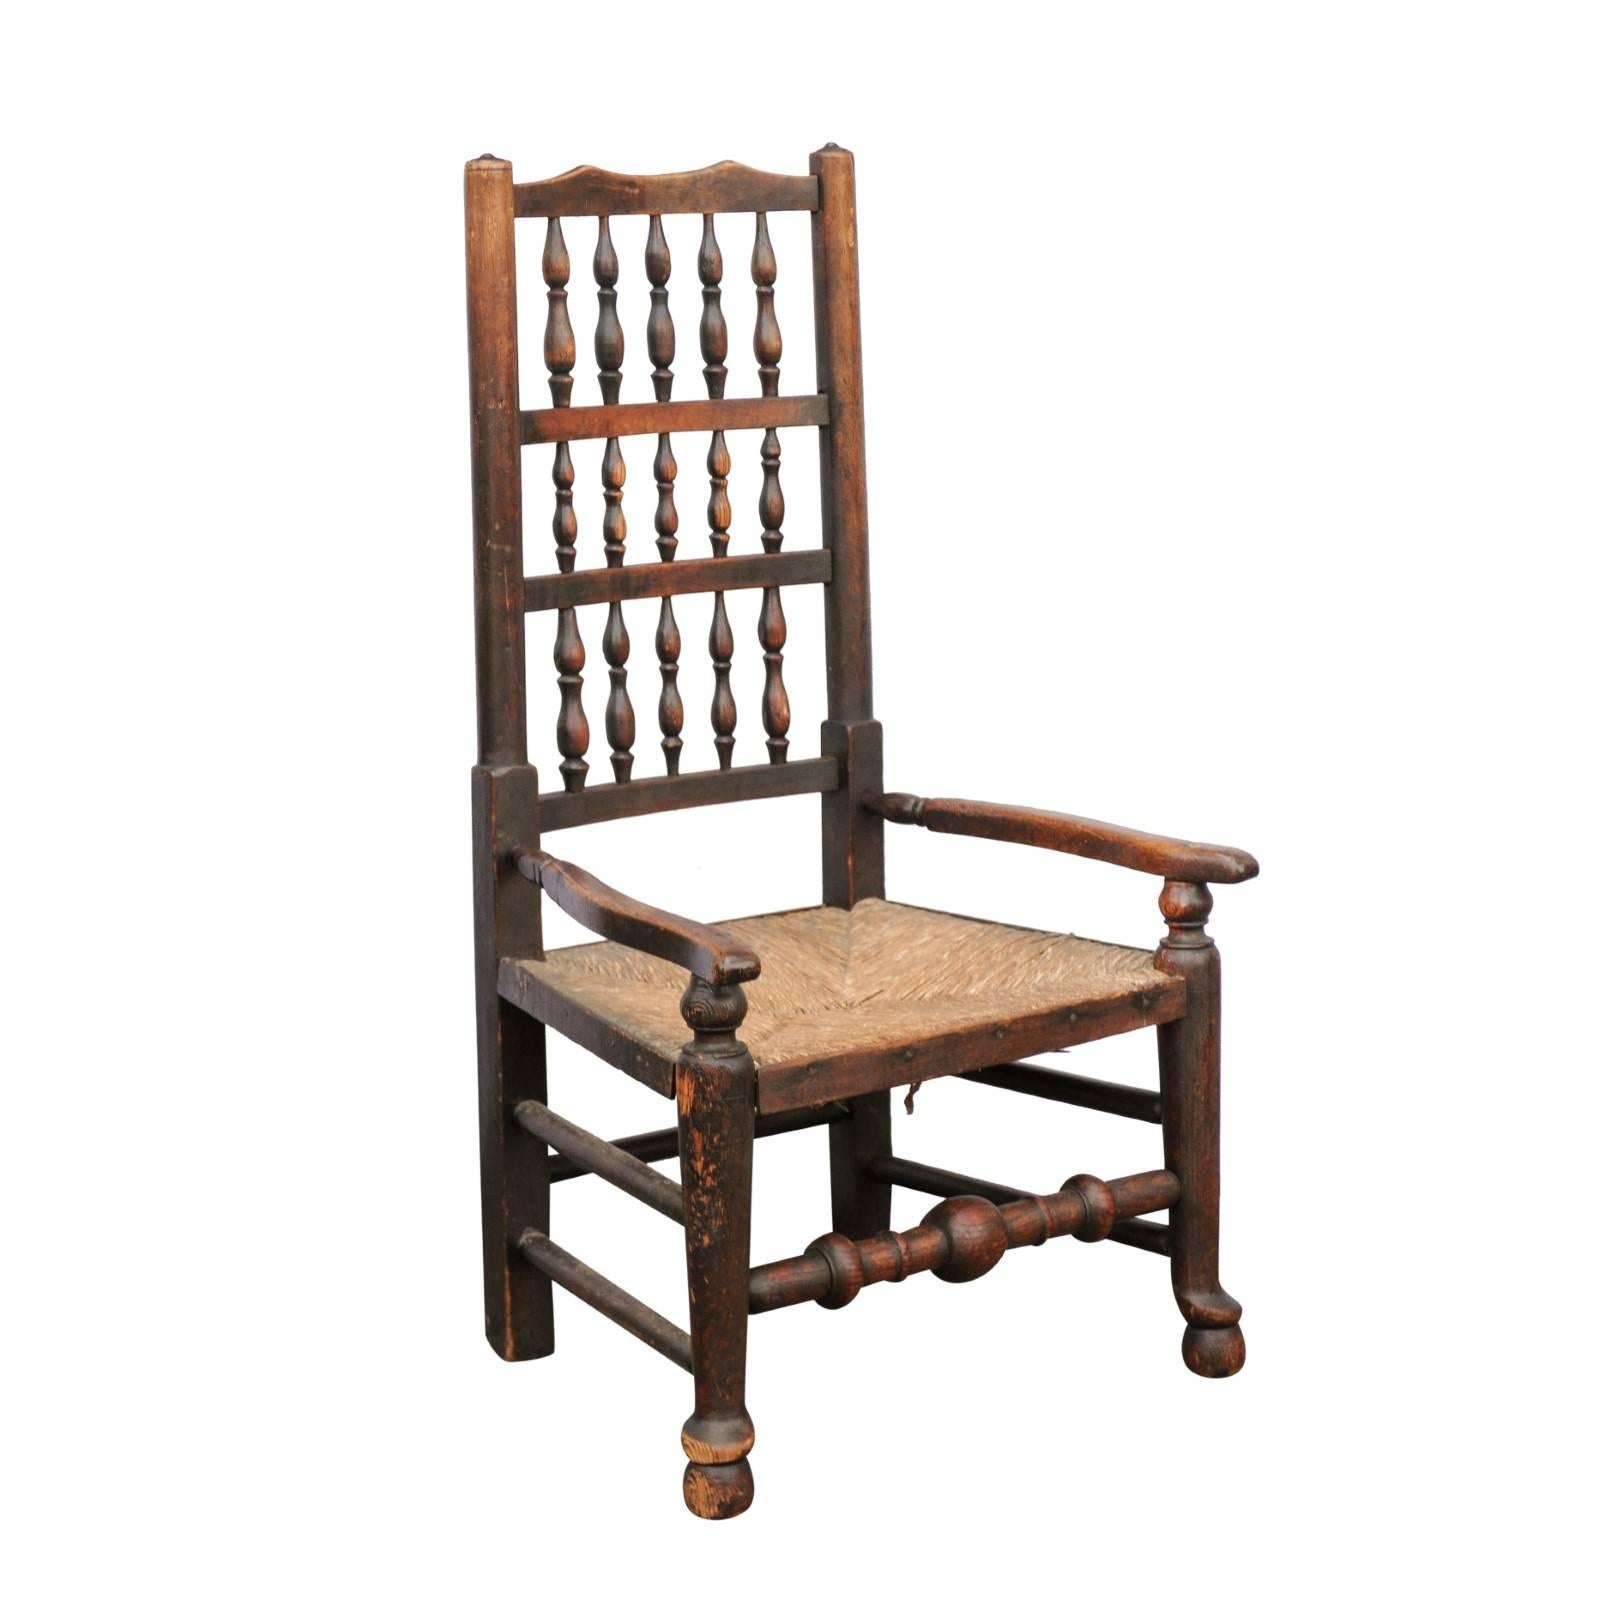 English 1780s Oak William and Mary Style Open Arm Youth Chair with Rush Seat